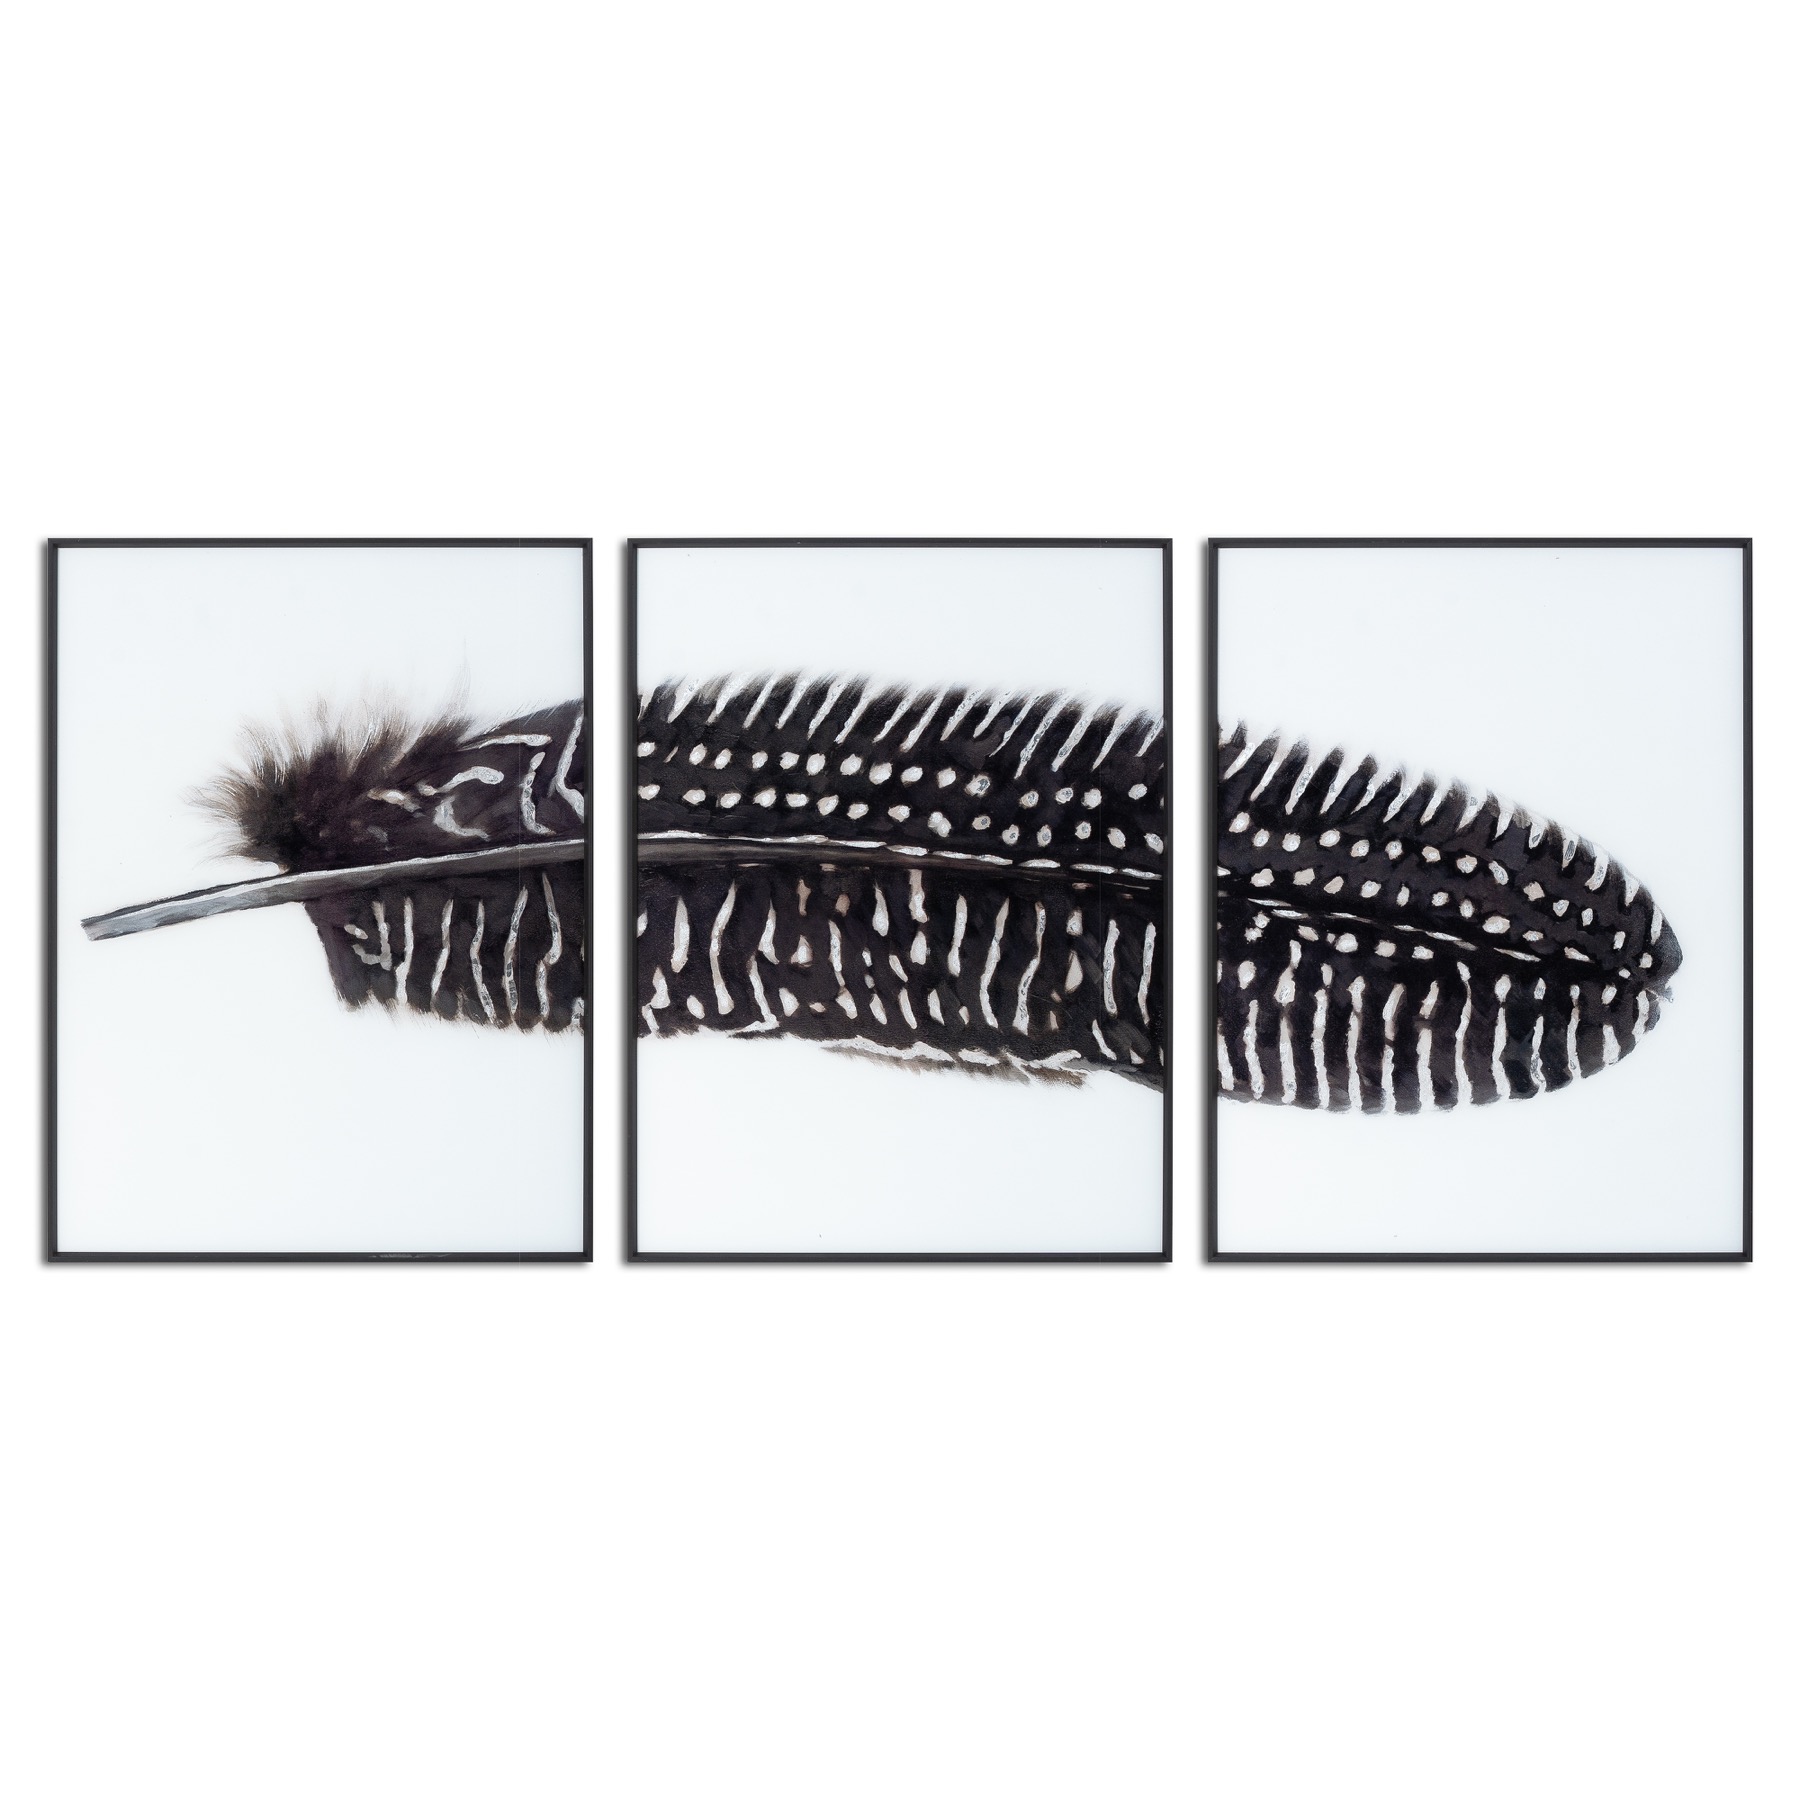 Black Feather With White Spots Over 3 Black Glass Frames - Image 1